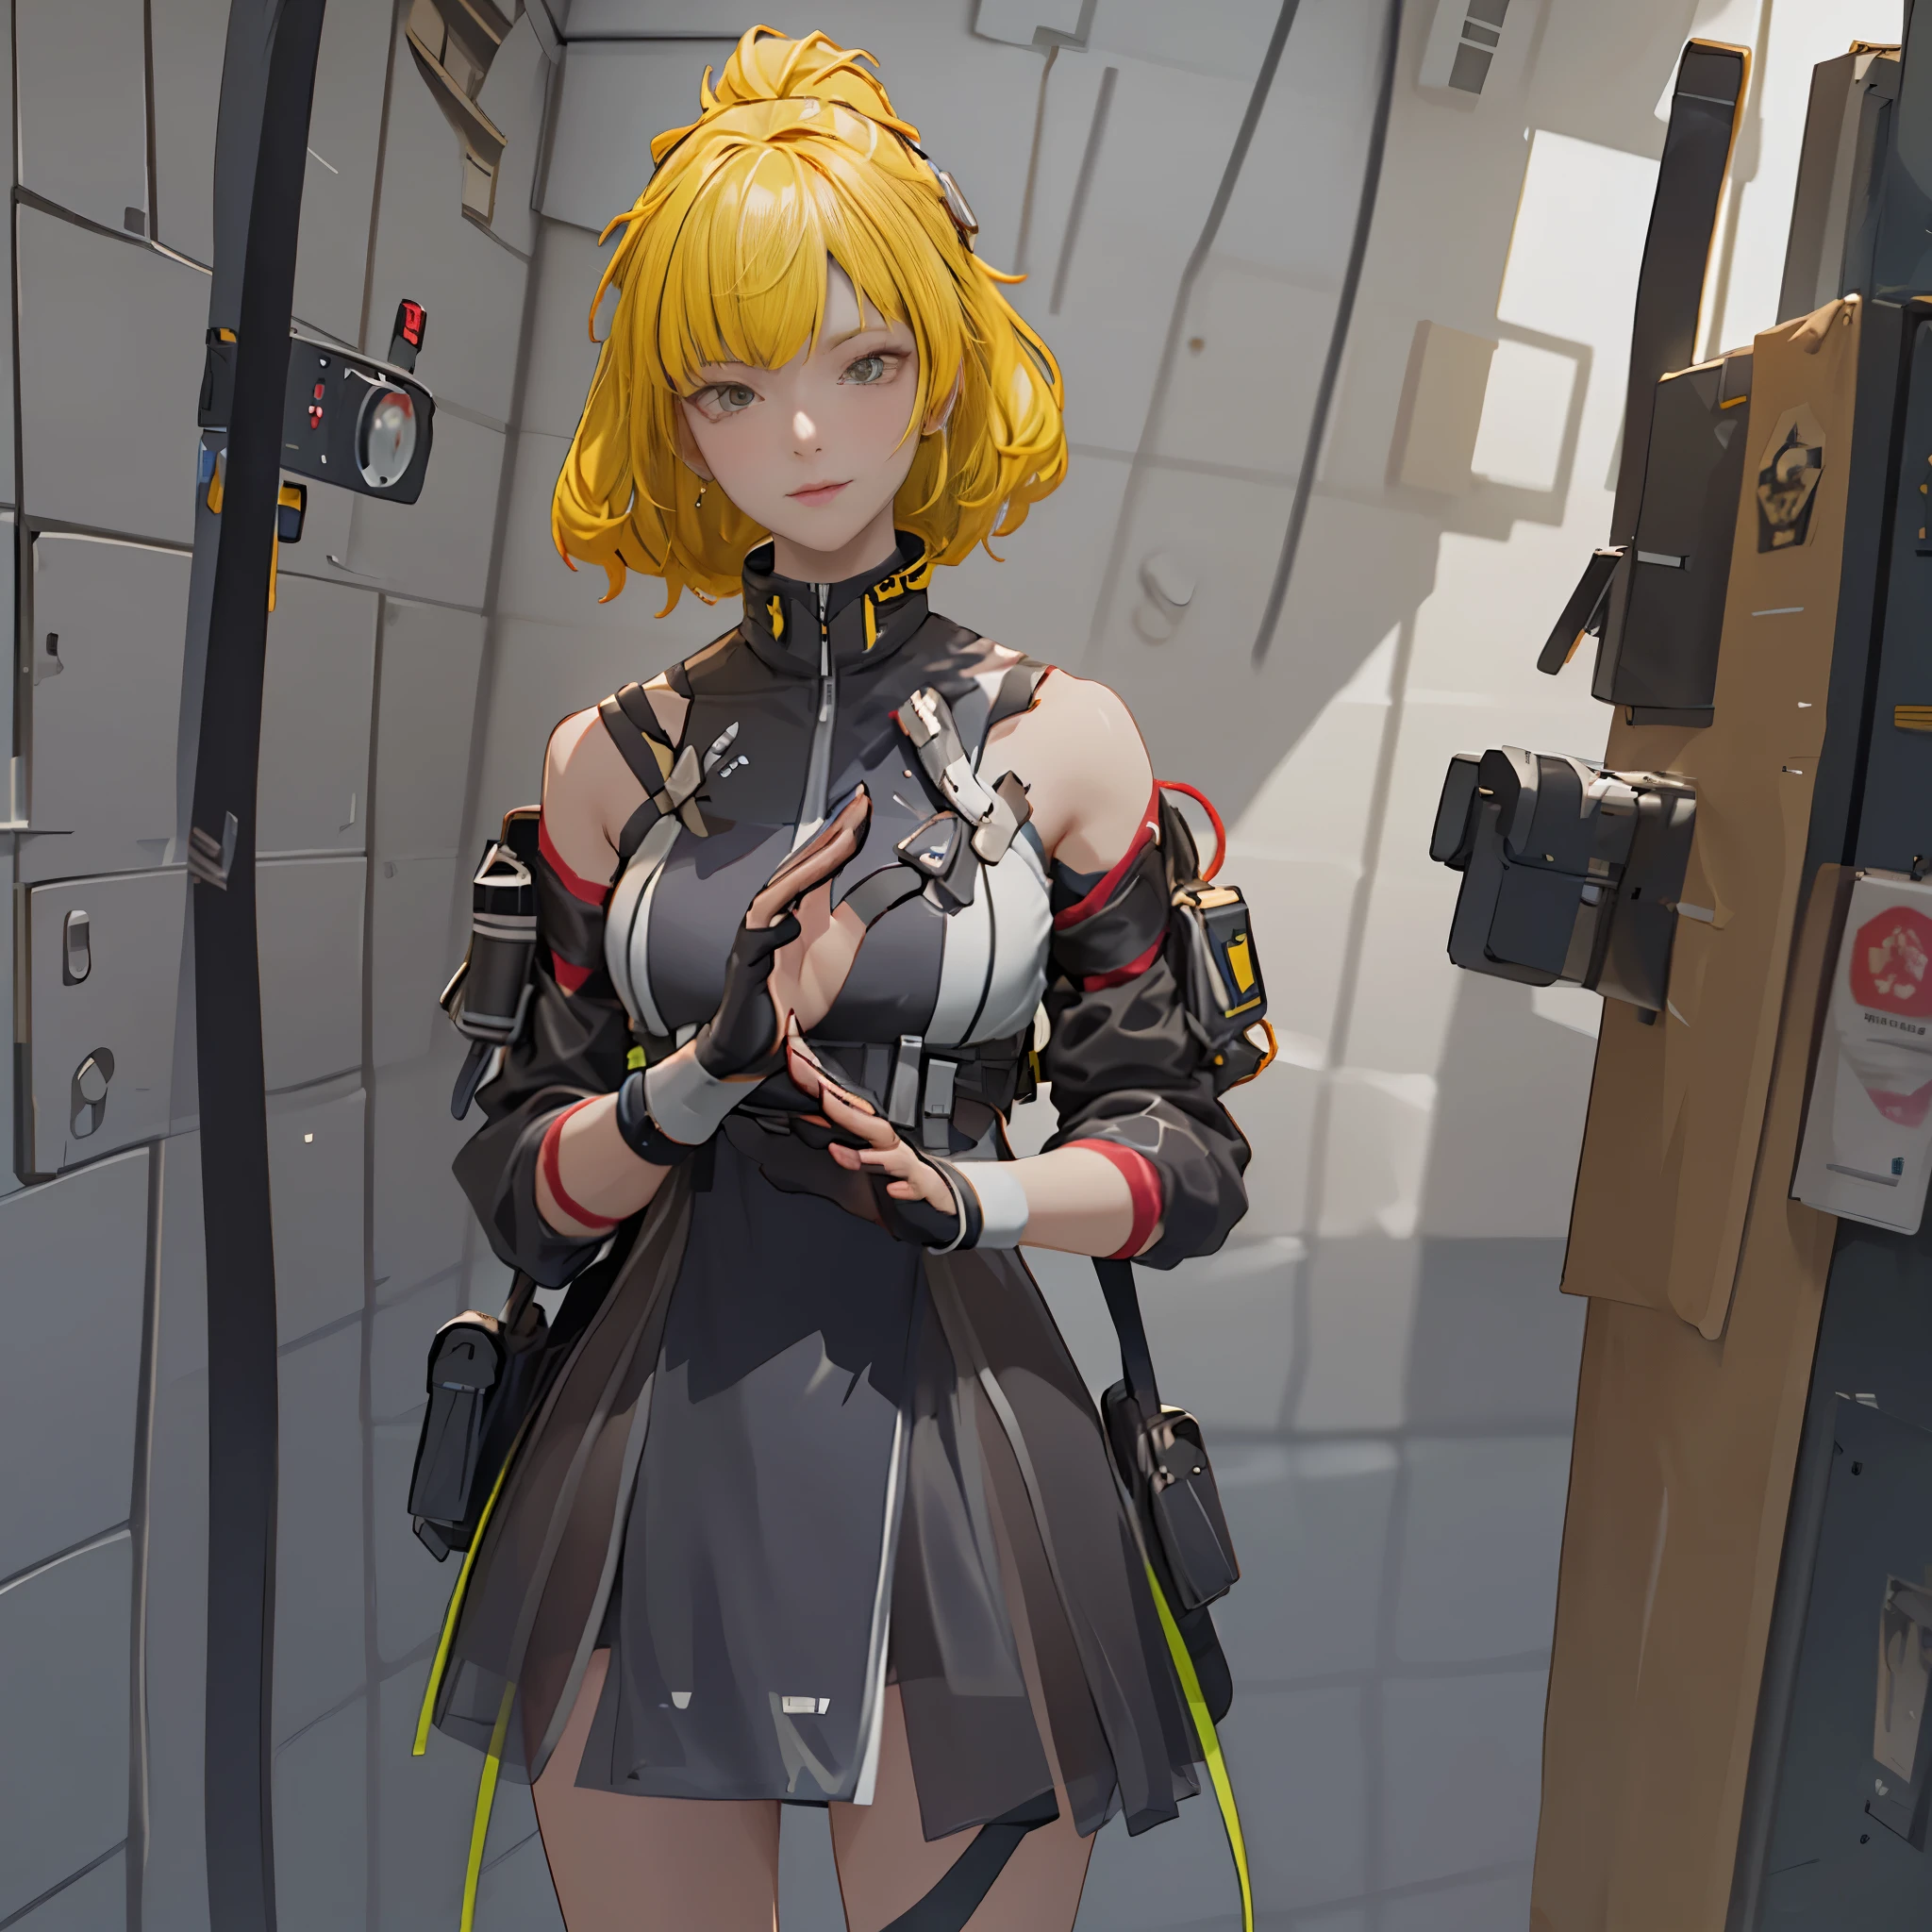 ((Best quality)), ((masterpiece)), (detailed:1.4), 3D, an image of a beautiful cyberpunk female, short yellow hair, red eyeys,HDR (High Dynamic Range),Ray Tracing,NVIDIA RTX,Super-Resolution,Unreal 5,Subsurface scattering,PBR Texturing,Post-processing,Anisotropic Filtering,Depth-of-field,Maximum clarity and sharpness,Multi-layered textures,Albedo and Specular maps,Surface shading,Accurate simulation of light-material interaction,Perfect proportions,Octane Render,Two-tone lighting,Wide aperture,Low ISO,White balance,Rule of thirds,8K RAW,